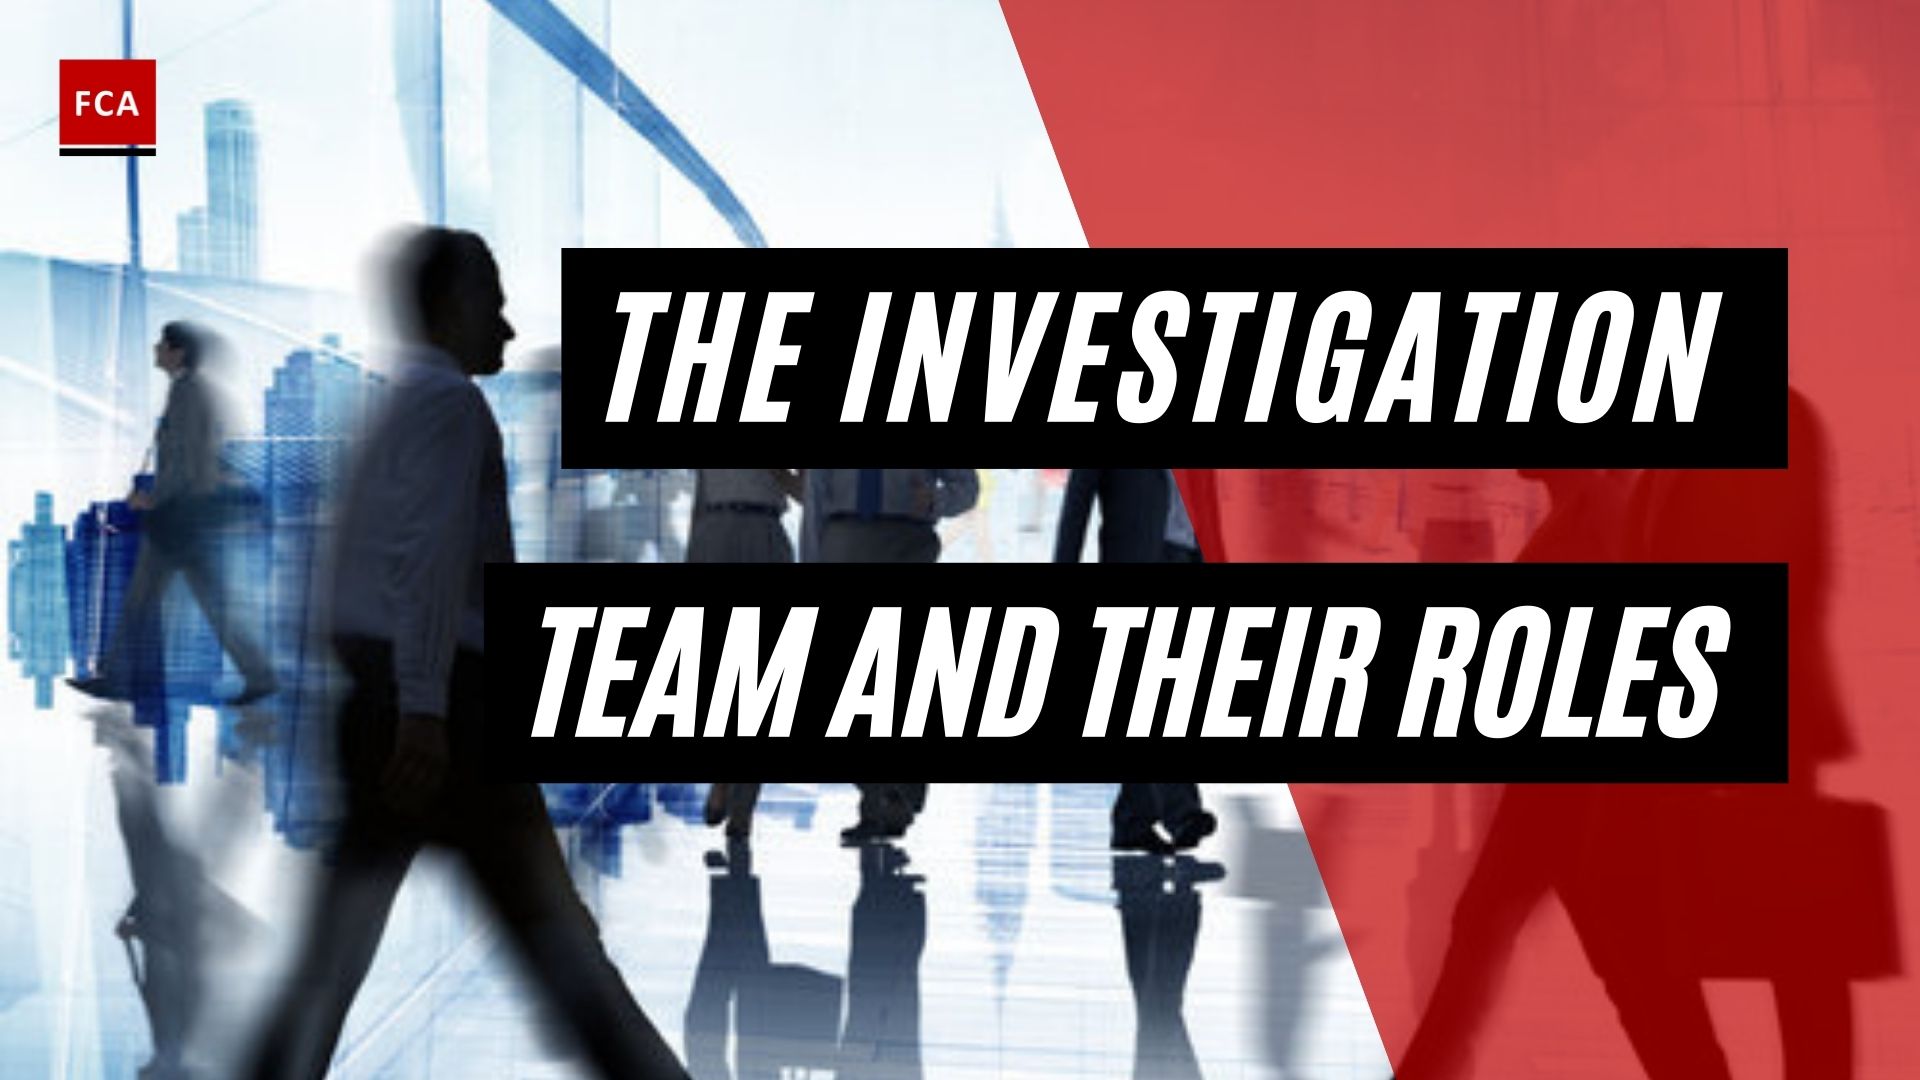 The Investigation Team And Their Roles